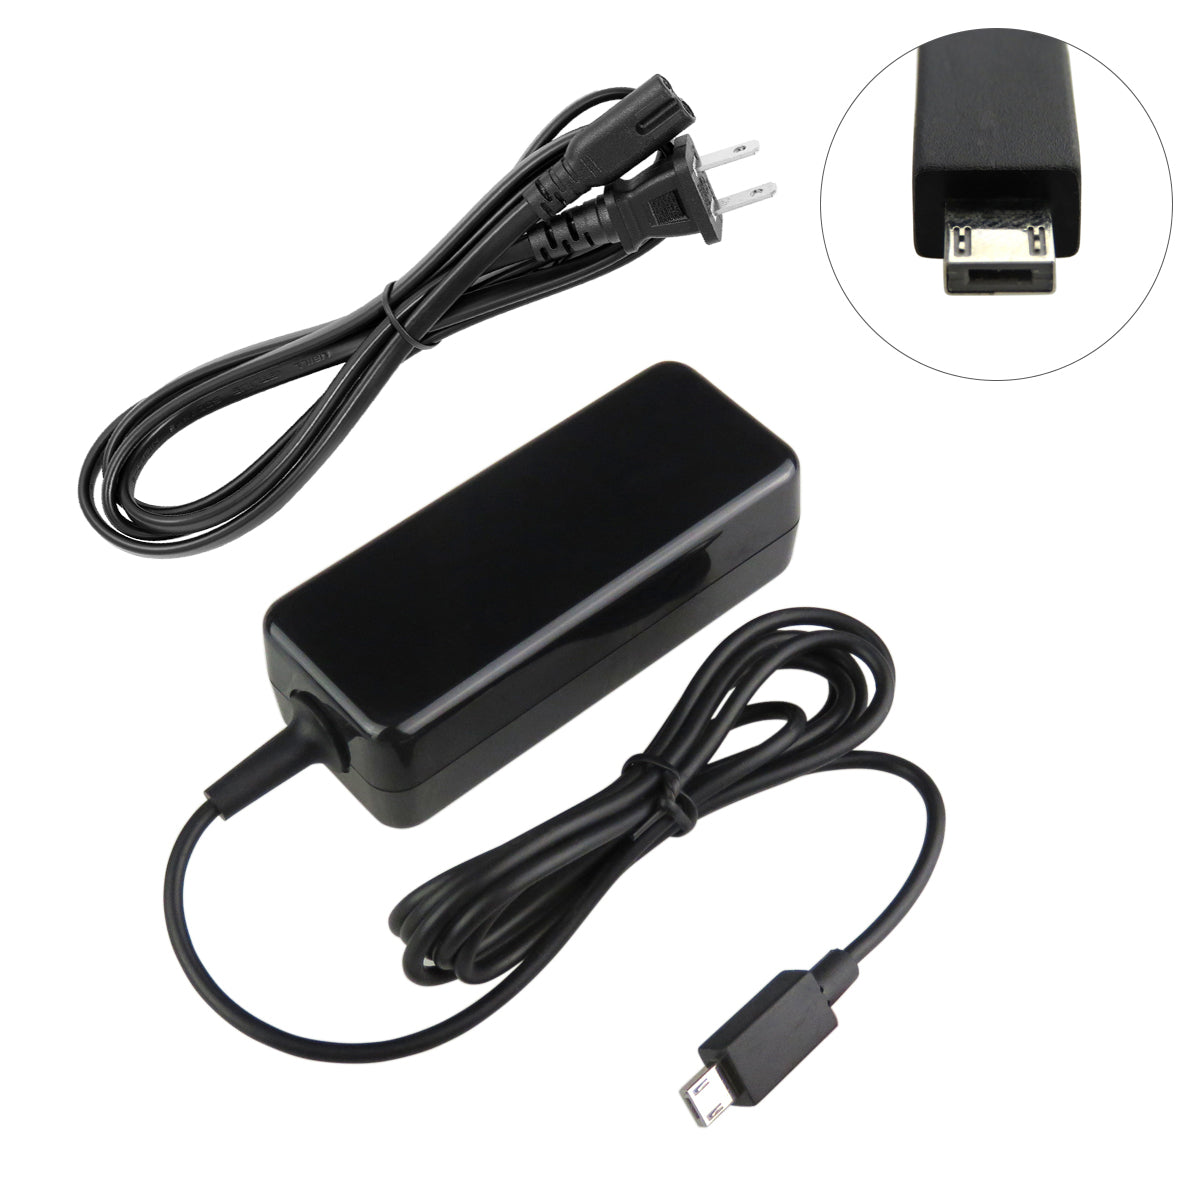 Charger for ASUS EeeBook X205 Series Laptop.